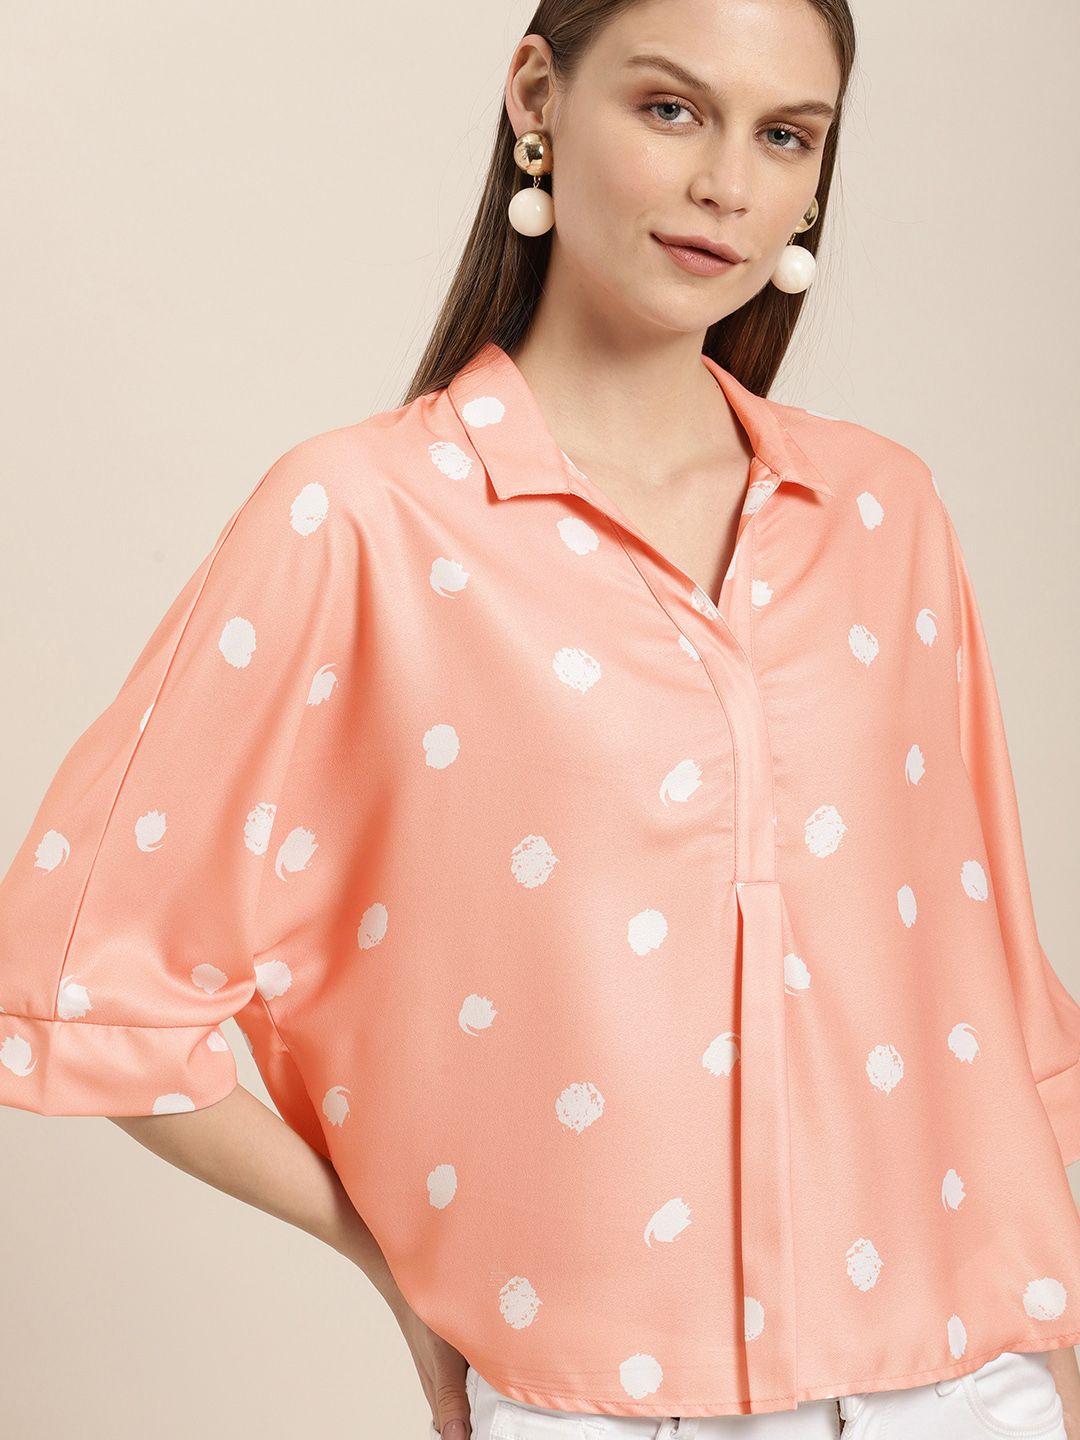 her by invictus women peach-coloured & off-white printed shirt style top